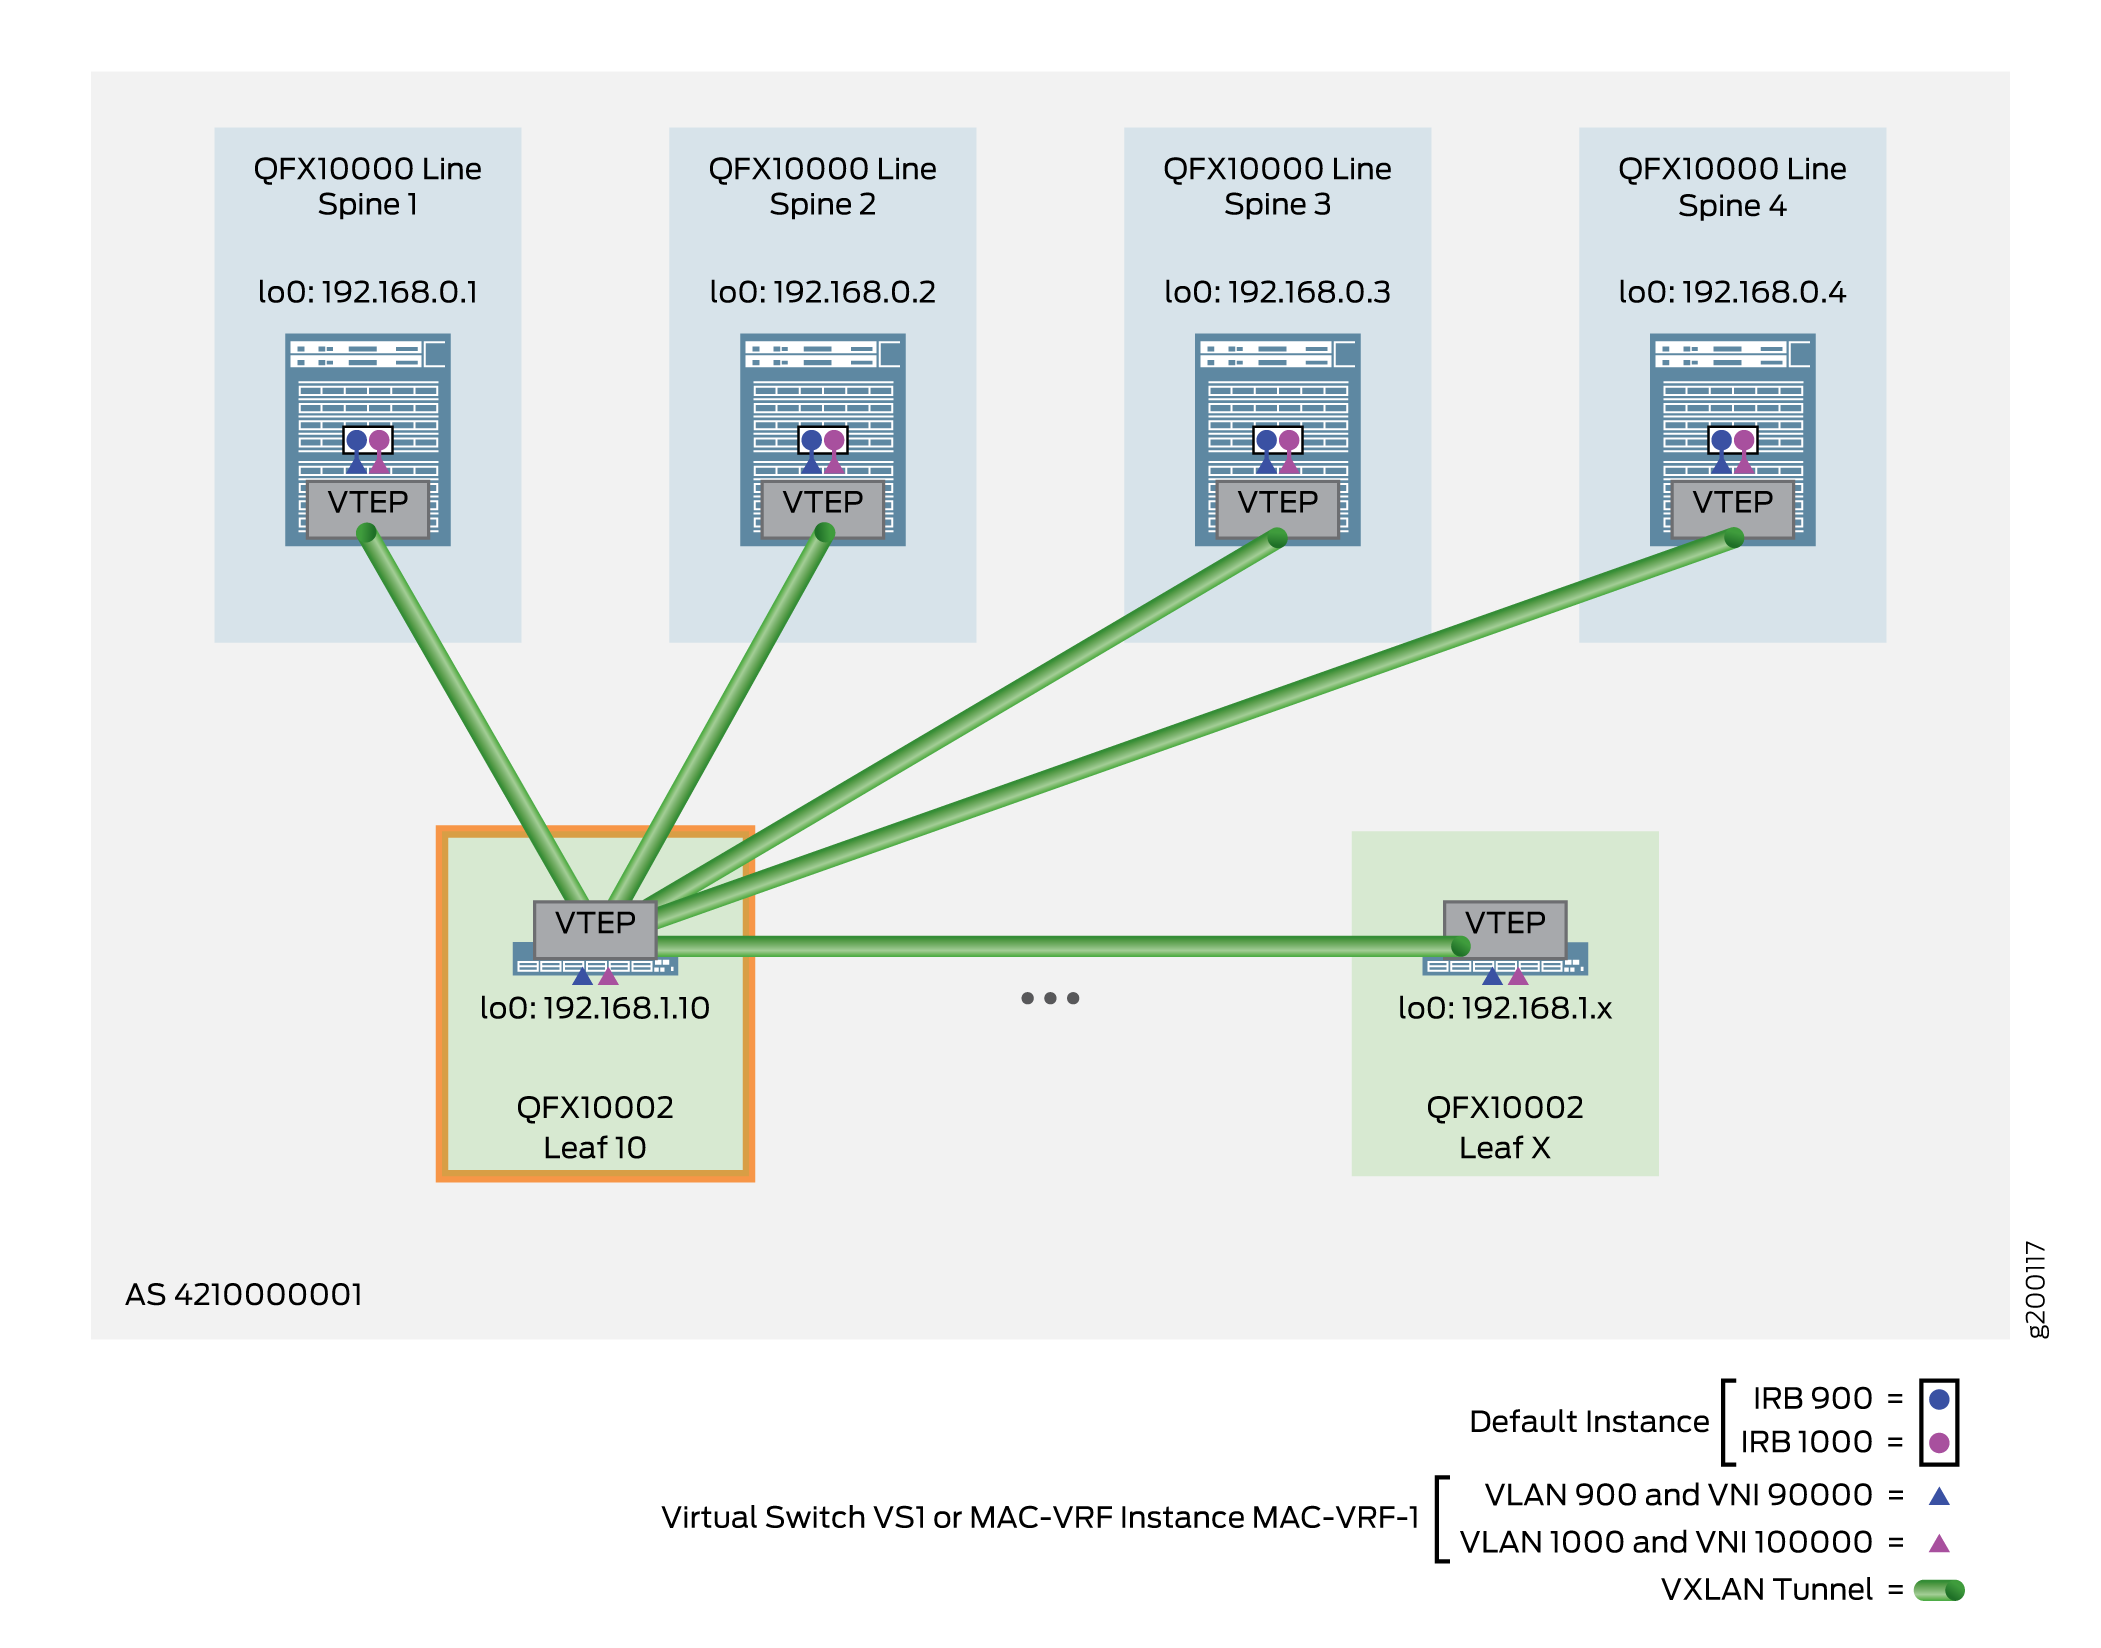 VLAN-Aware CRB Overlay with Virtual Switches or MAC-VRF Instances – Leaf Device